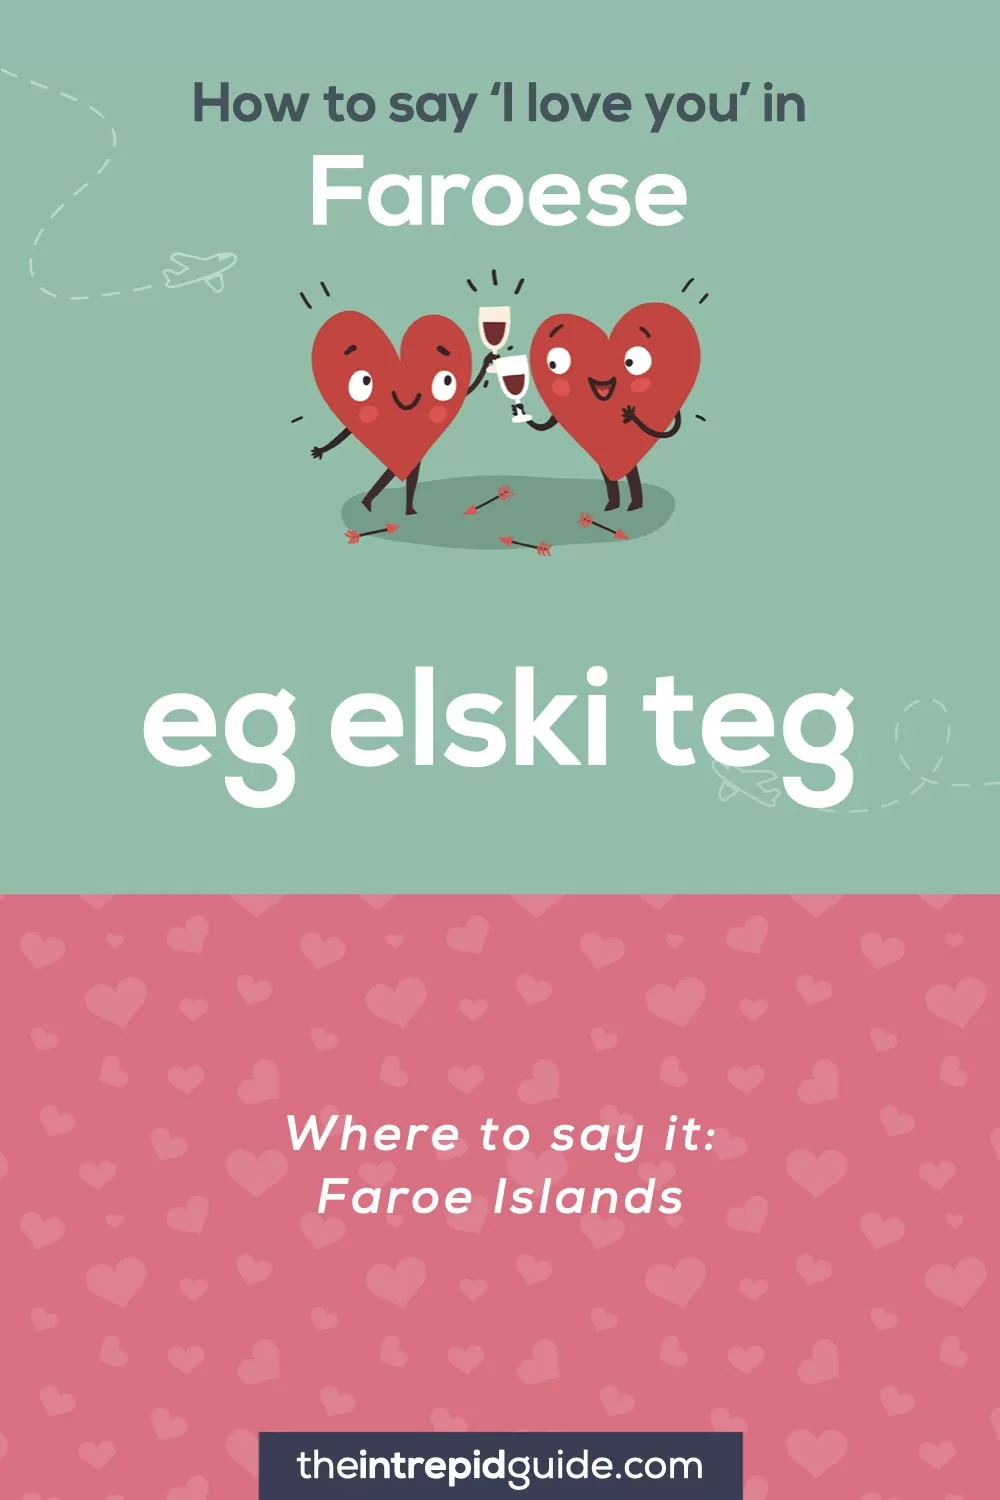 How to say I love you in different languages - Faroese - eg elski teg